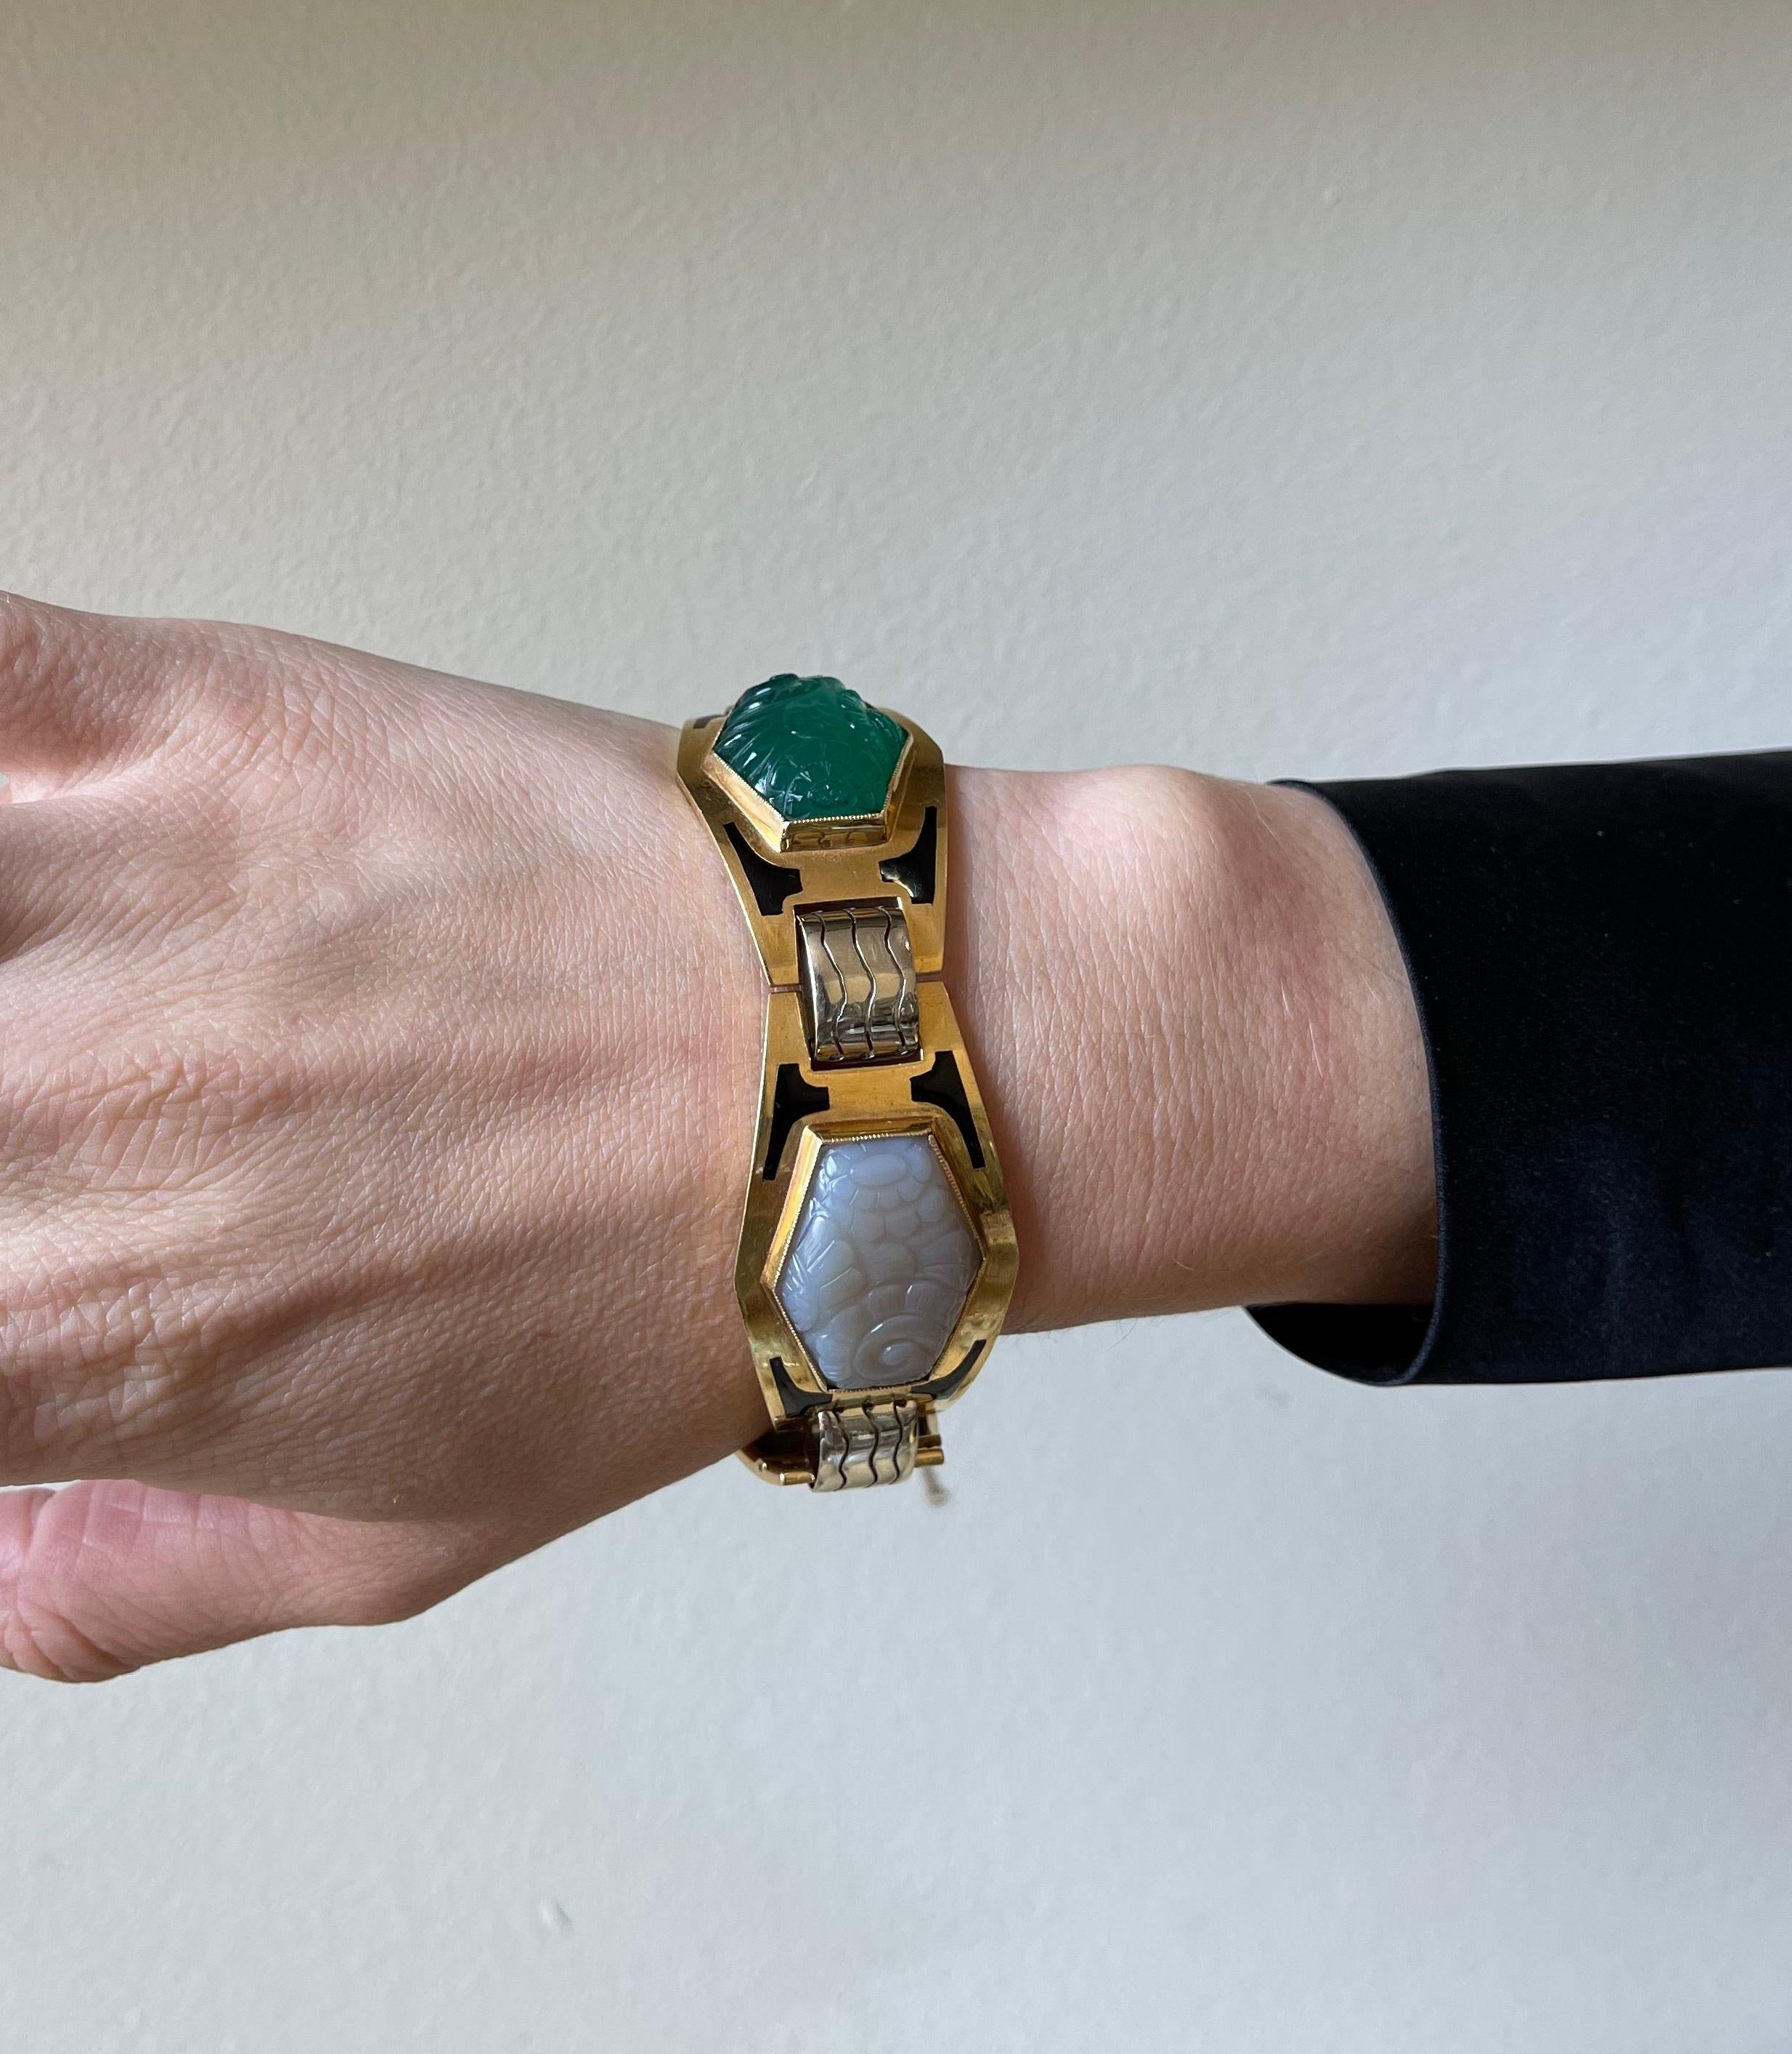 Art Deco beautiful 18k gold French made bracelet, with black enamel (few areas show loss of enamel), as well as carved chrysoprase and chalcedony. Bracelet is 7.5